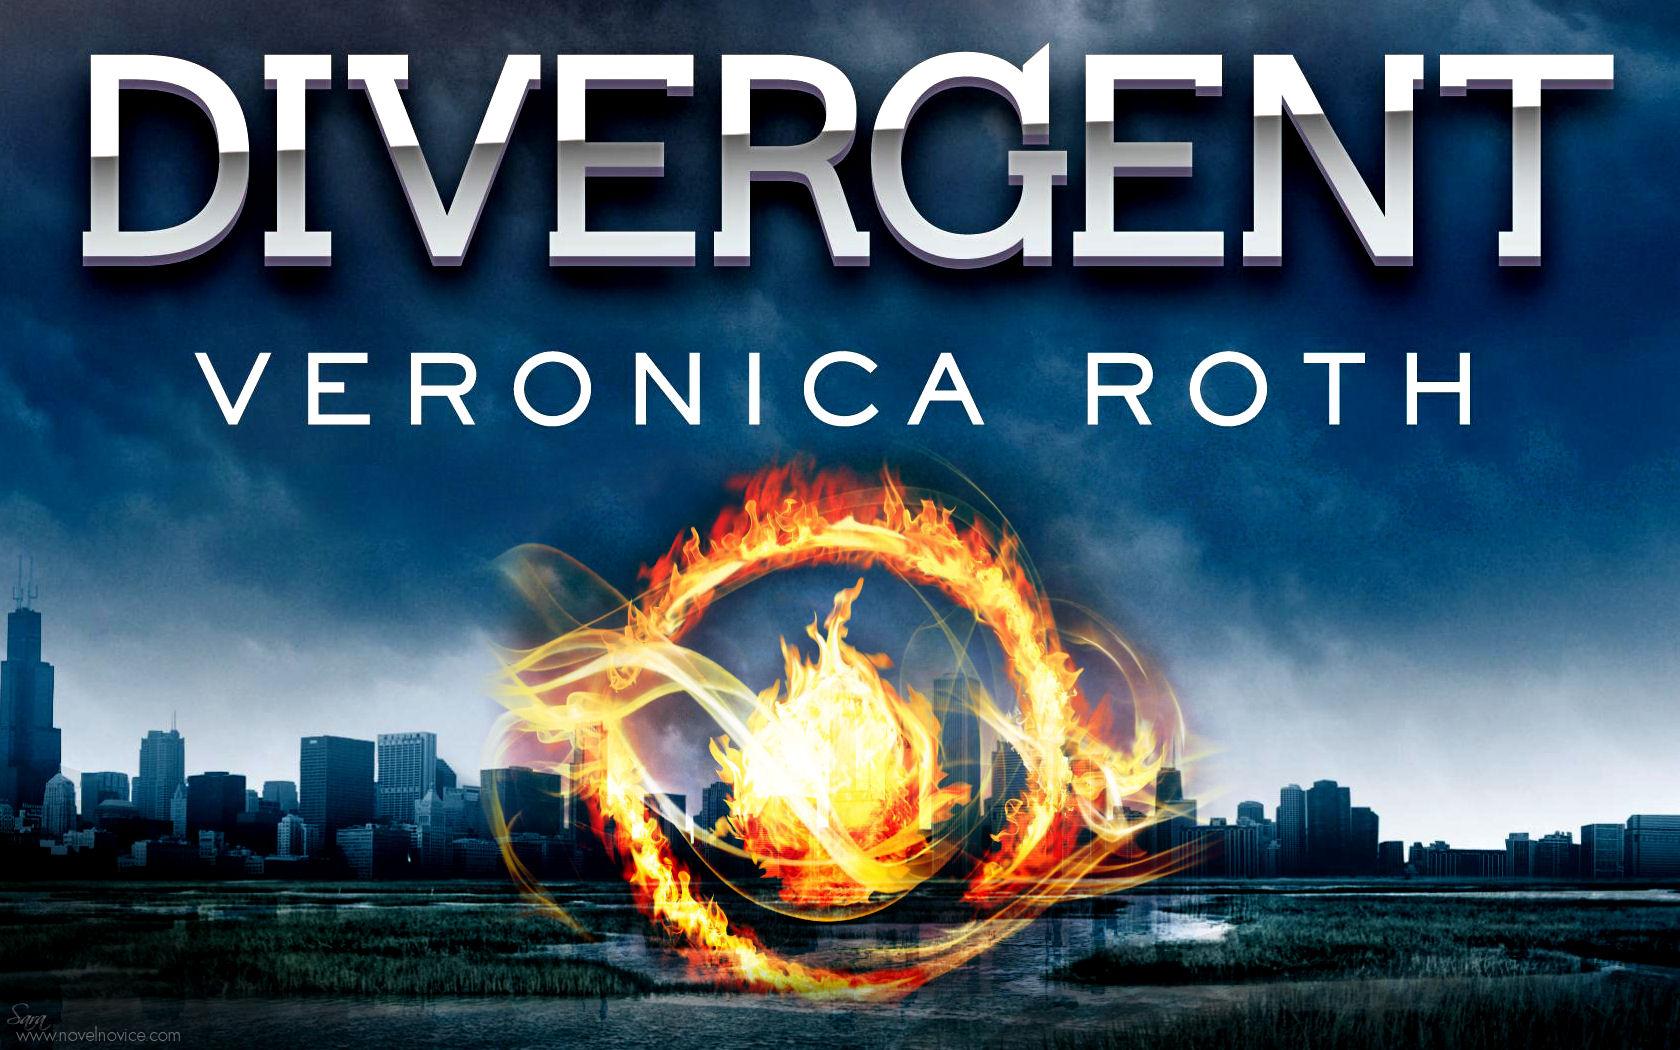 Book review: The Divergent Trilogy